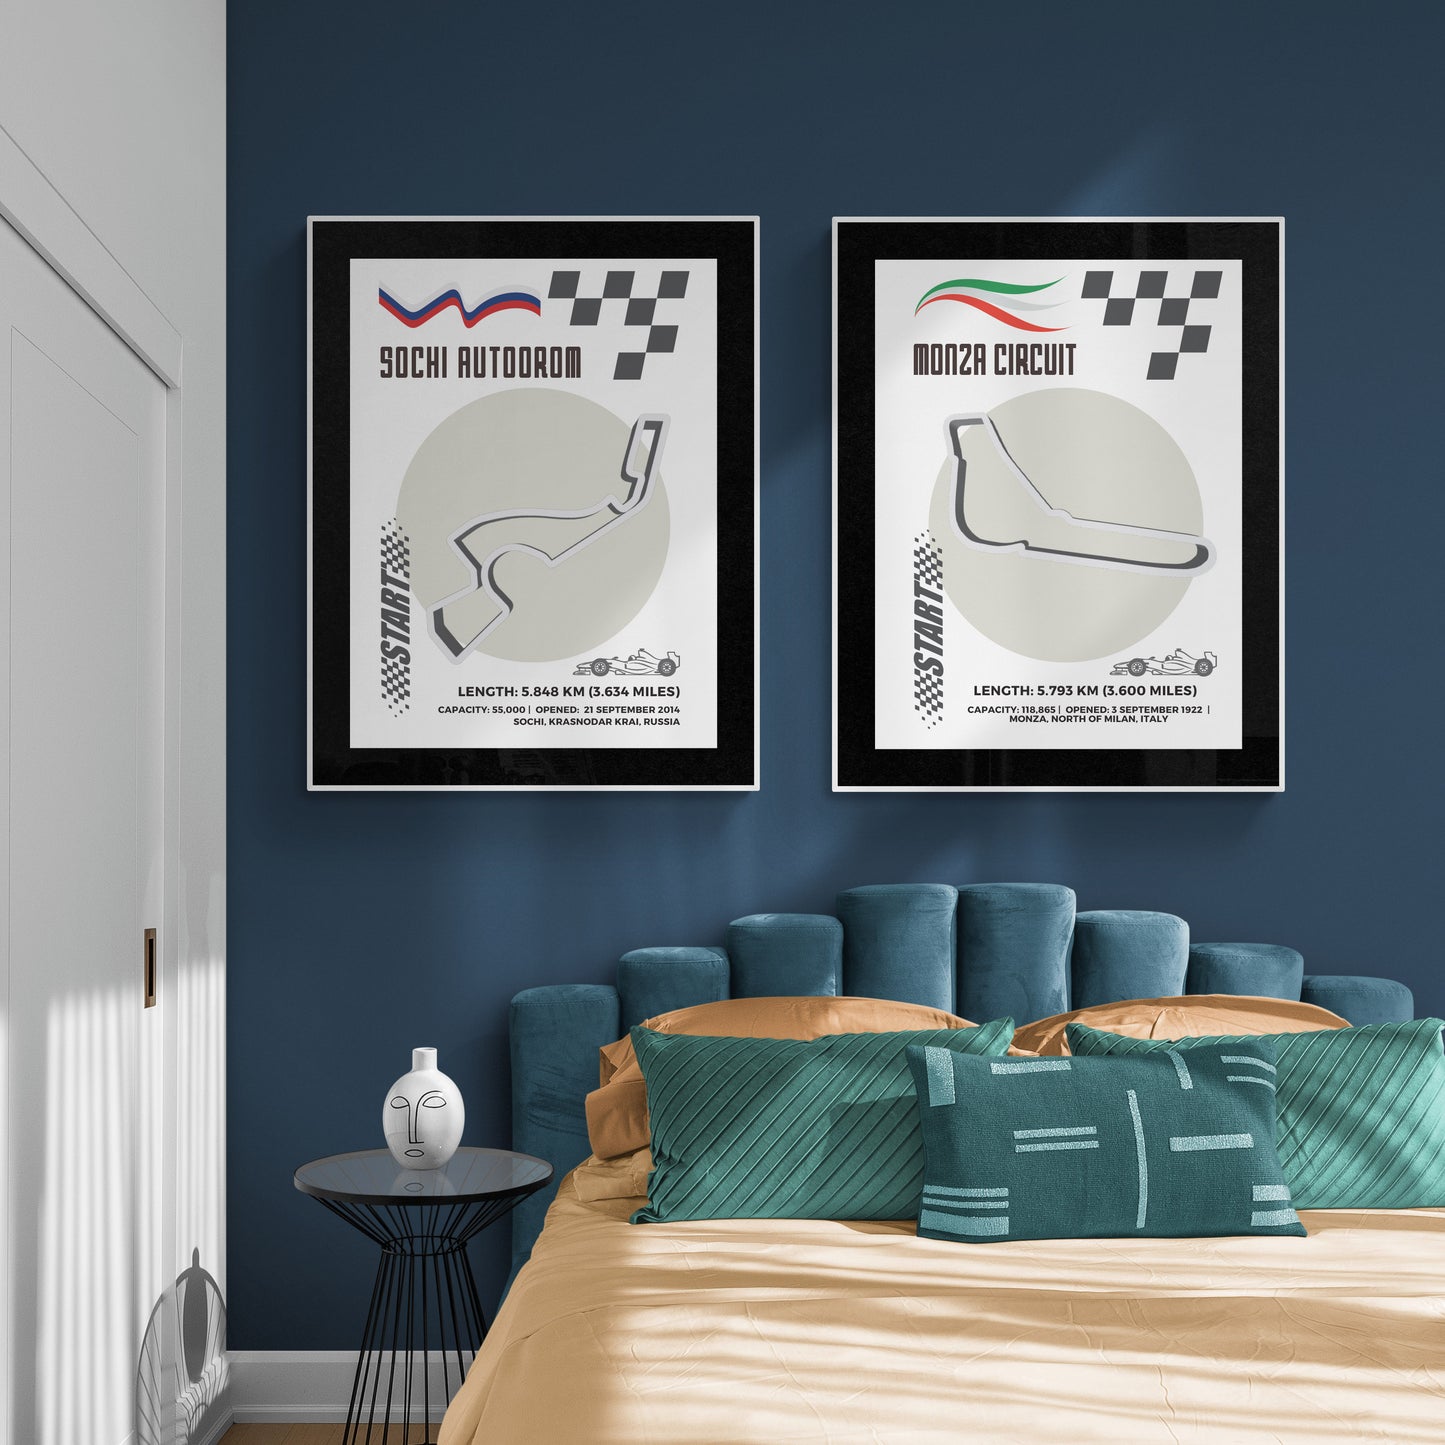 Experience the thrill of F1 racing with Imola Circuit F1 Italy Posters. Featuring a detailed map of each track and essential information about its history and notable moments, these posters are perfect for any formula one fan. Printed on premium, age-resistant paper and produced in the UK, this is a must-have for any racing enthusiast's wall.